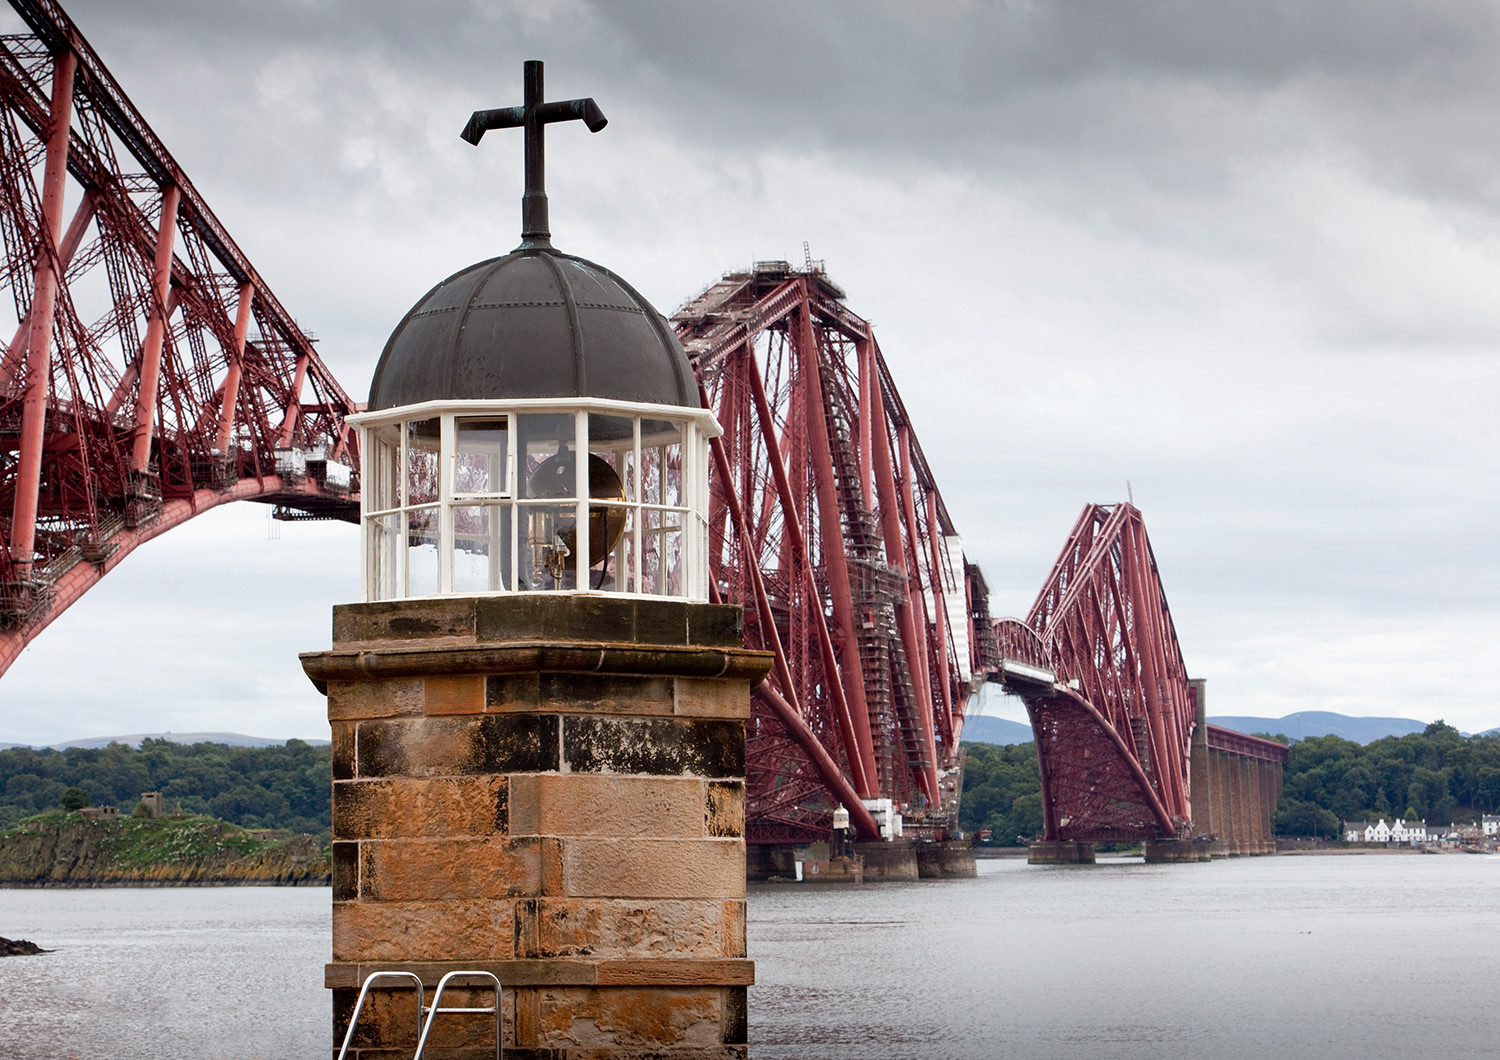 The top of a small light tower, with the Forth Bridge beyond.